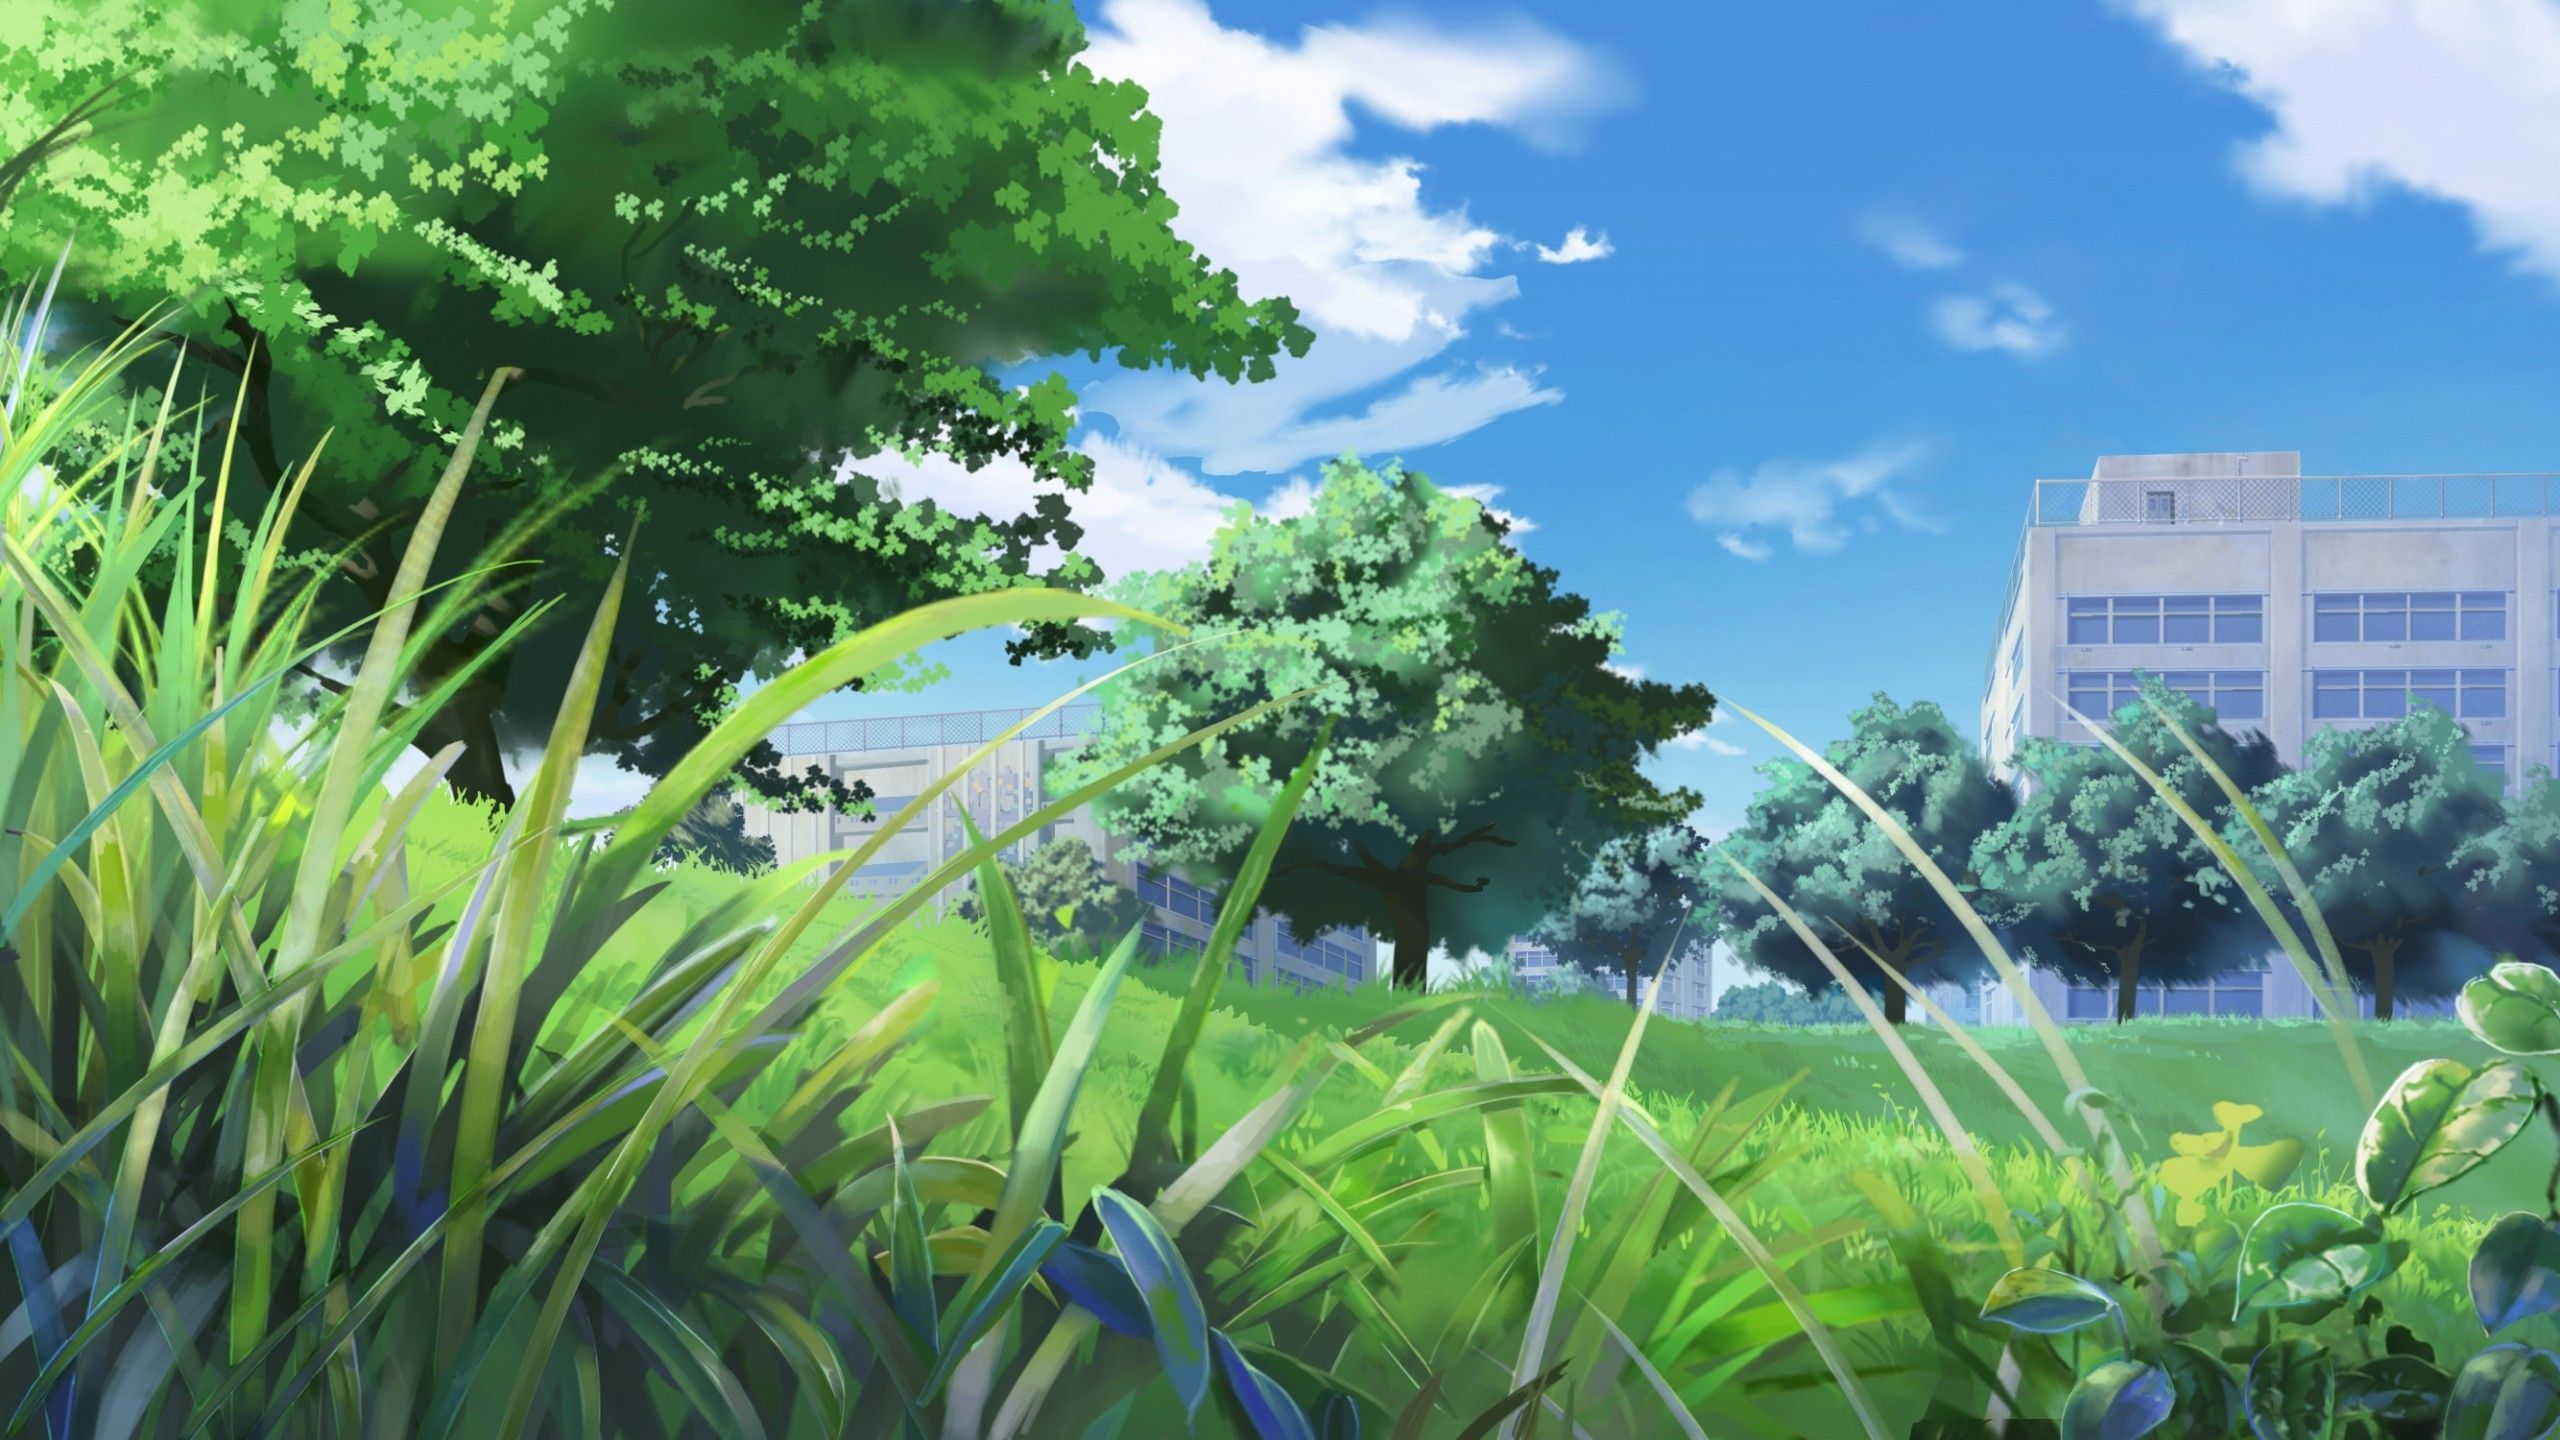 Premium Photo | Anime landscape with a bunny in the grass